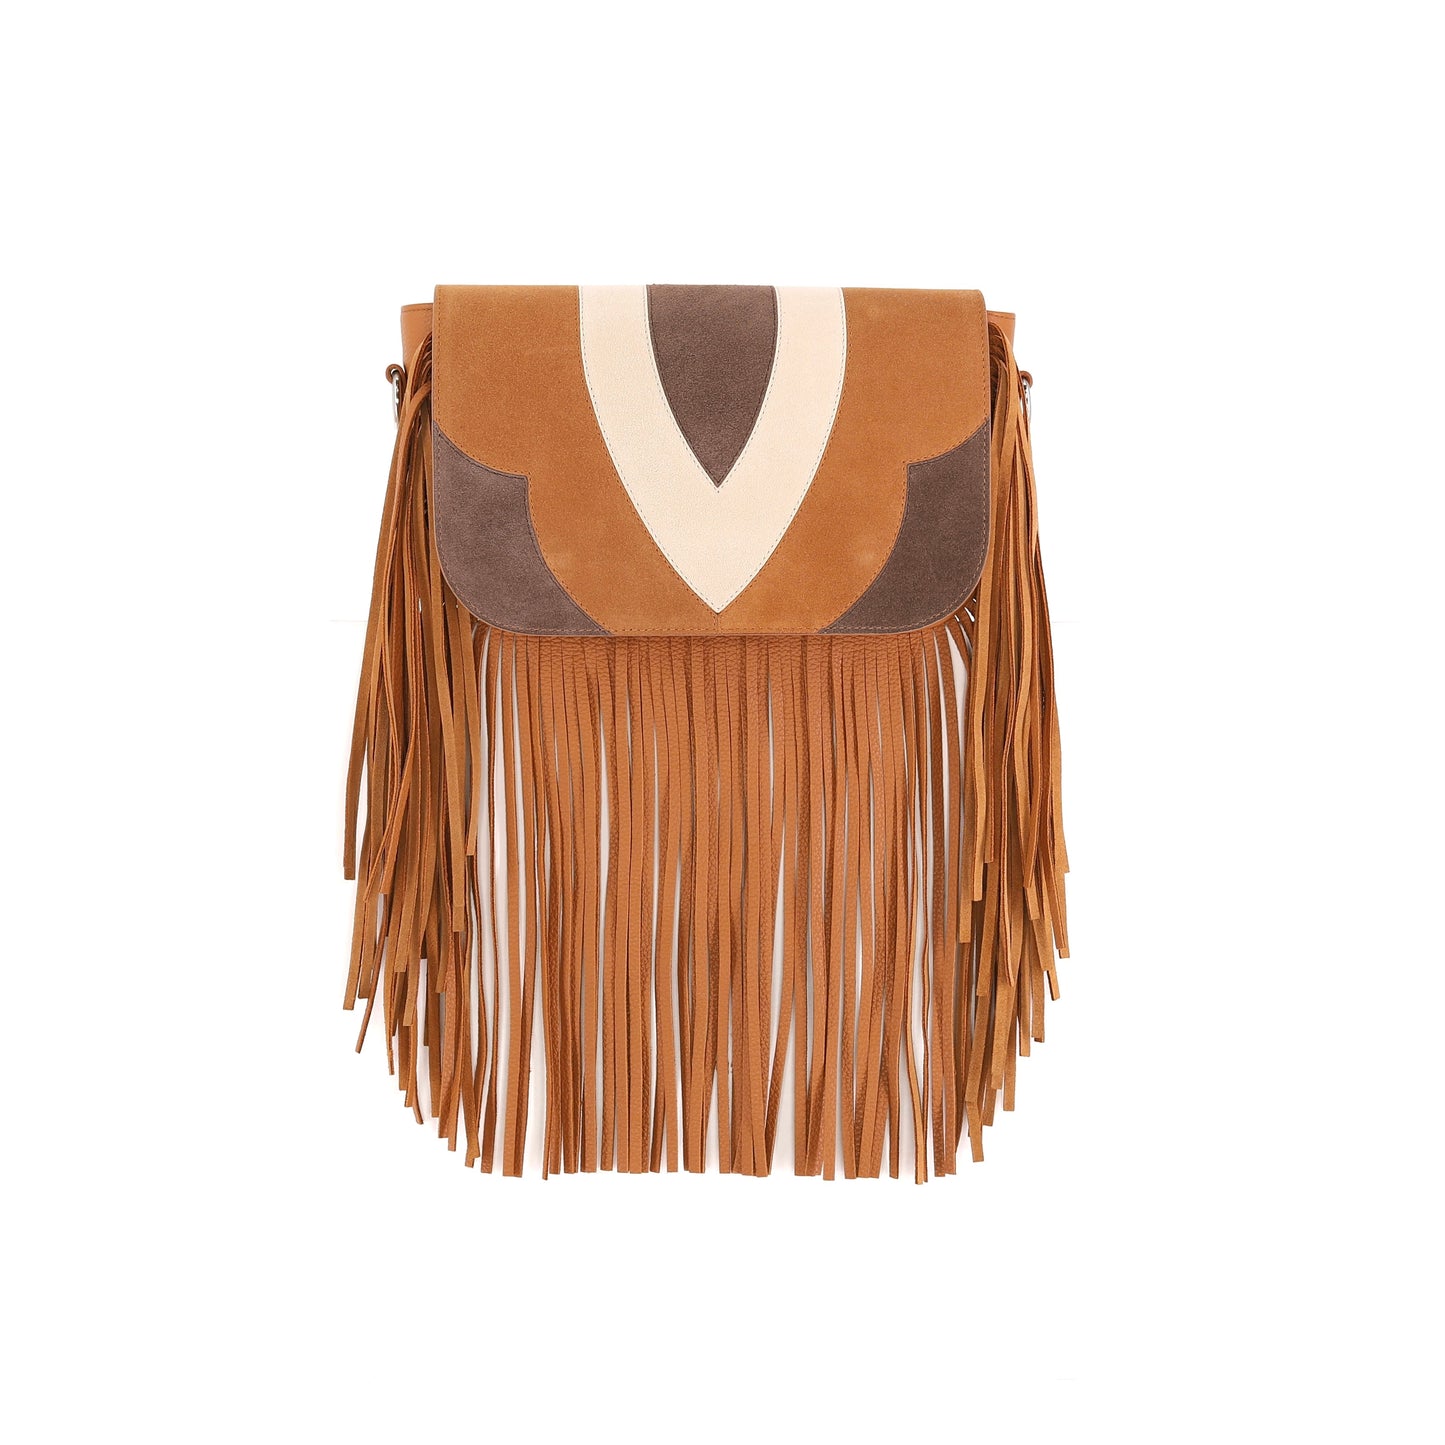 FREE SPIRIT flap suede leather caramel small